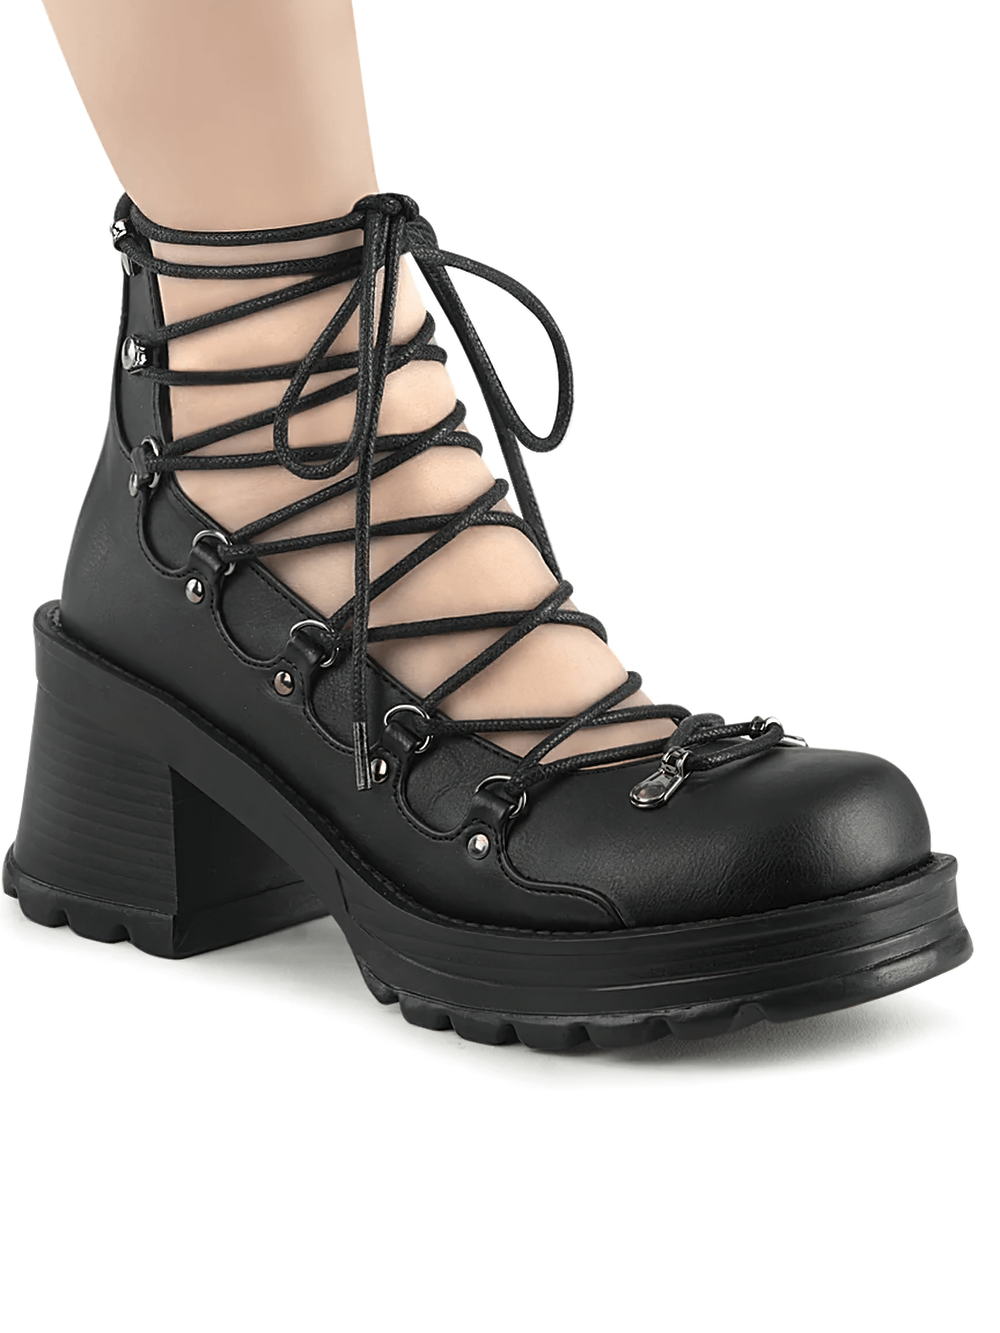 DEMONIA Edgy Black Ankle Boot with Chunky Heel and Zip